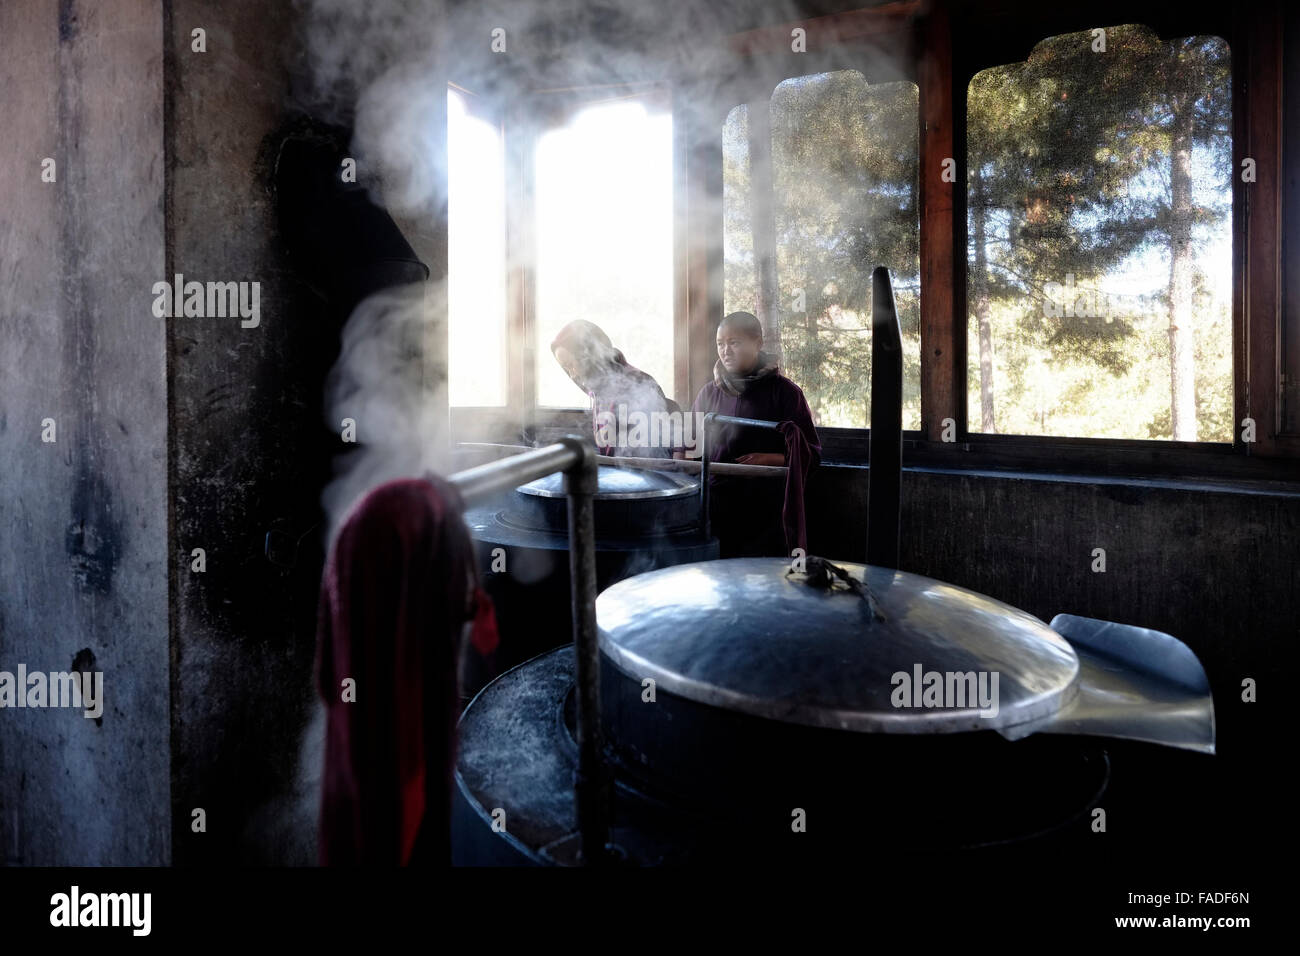 Buddhist nuns cooking in the kitchen of Pema Choling Nunnery in Bumthang in Tang valley in Bhutan Stock Photo